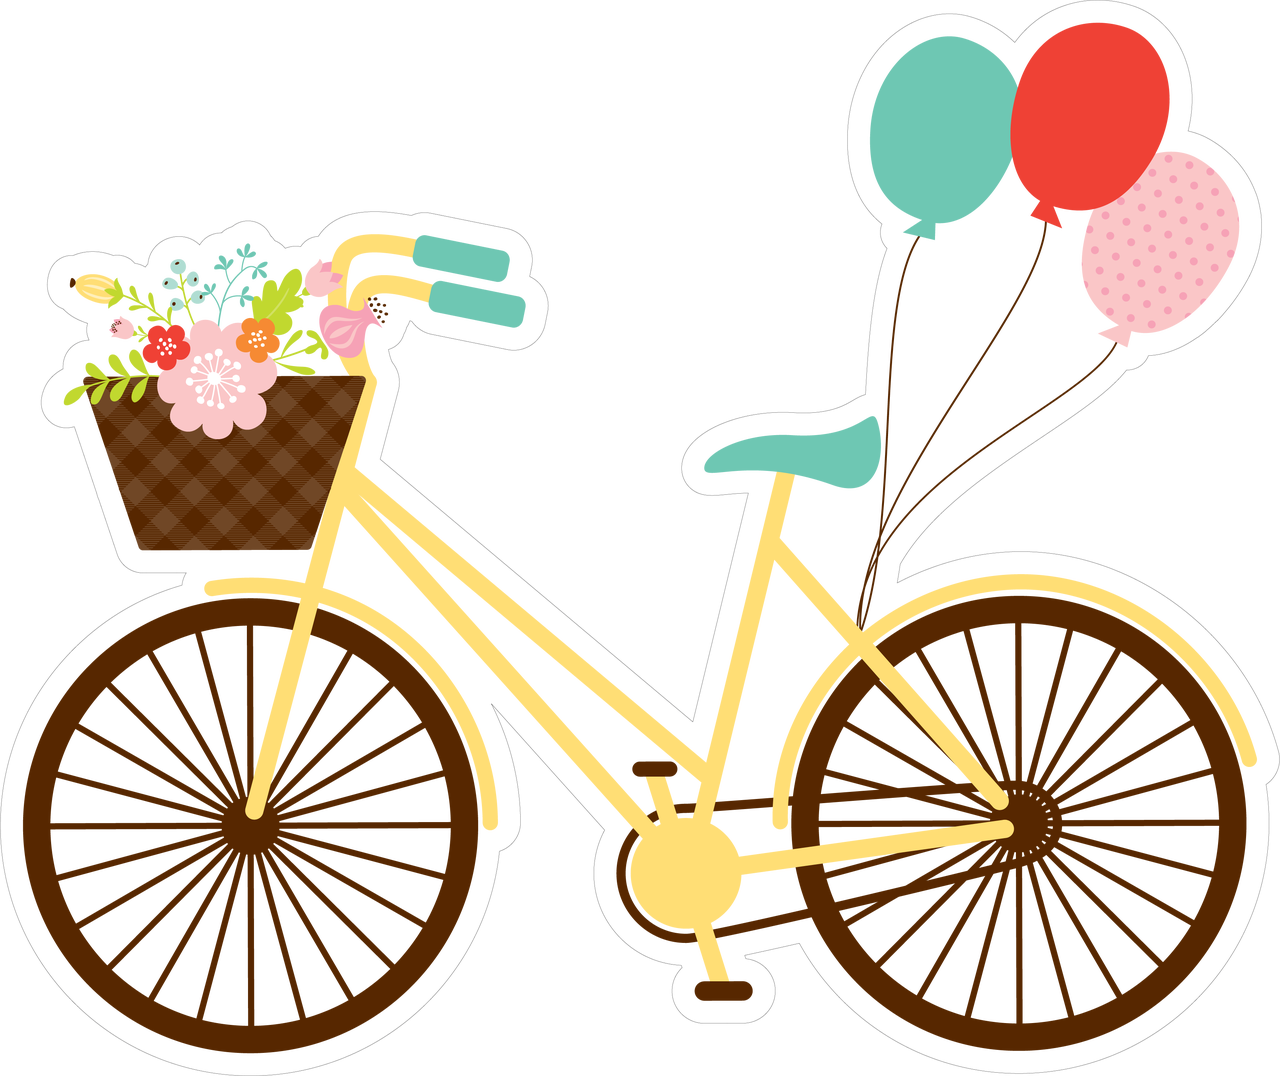 Bike with Balloons Print & Cut File